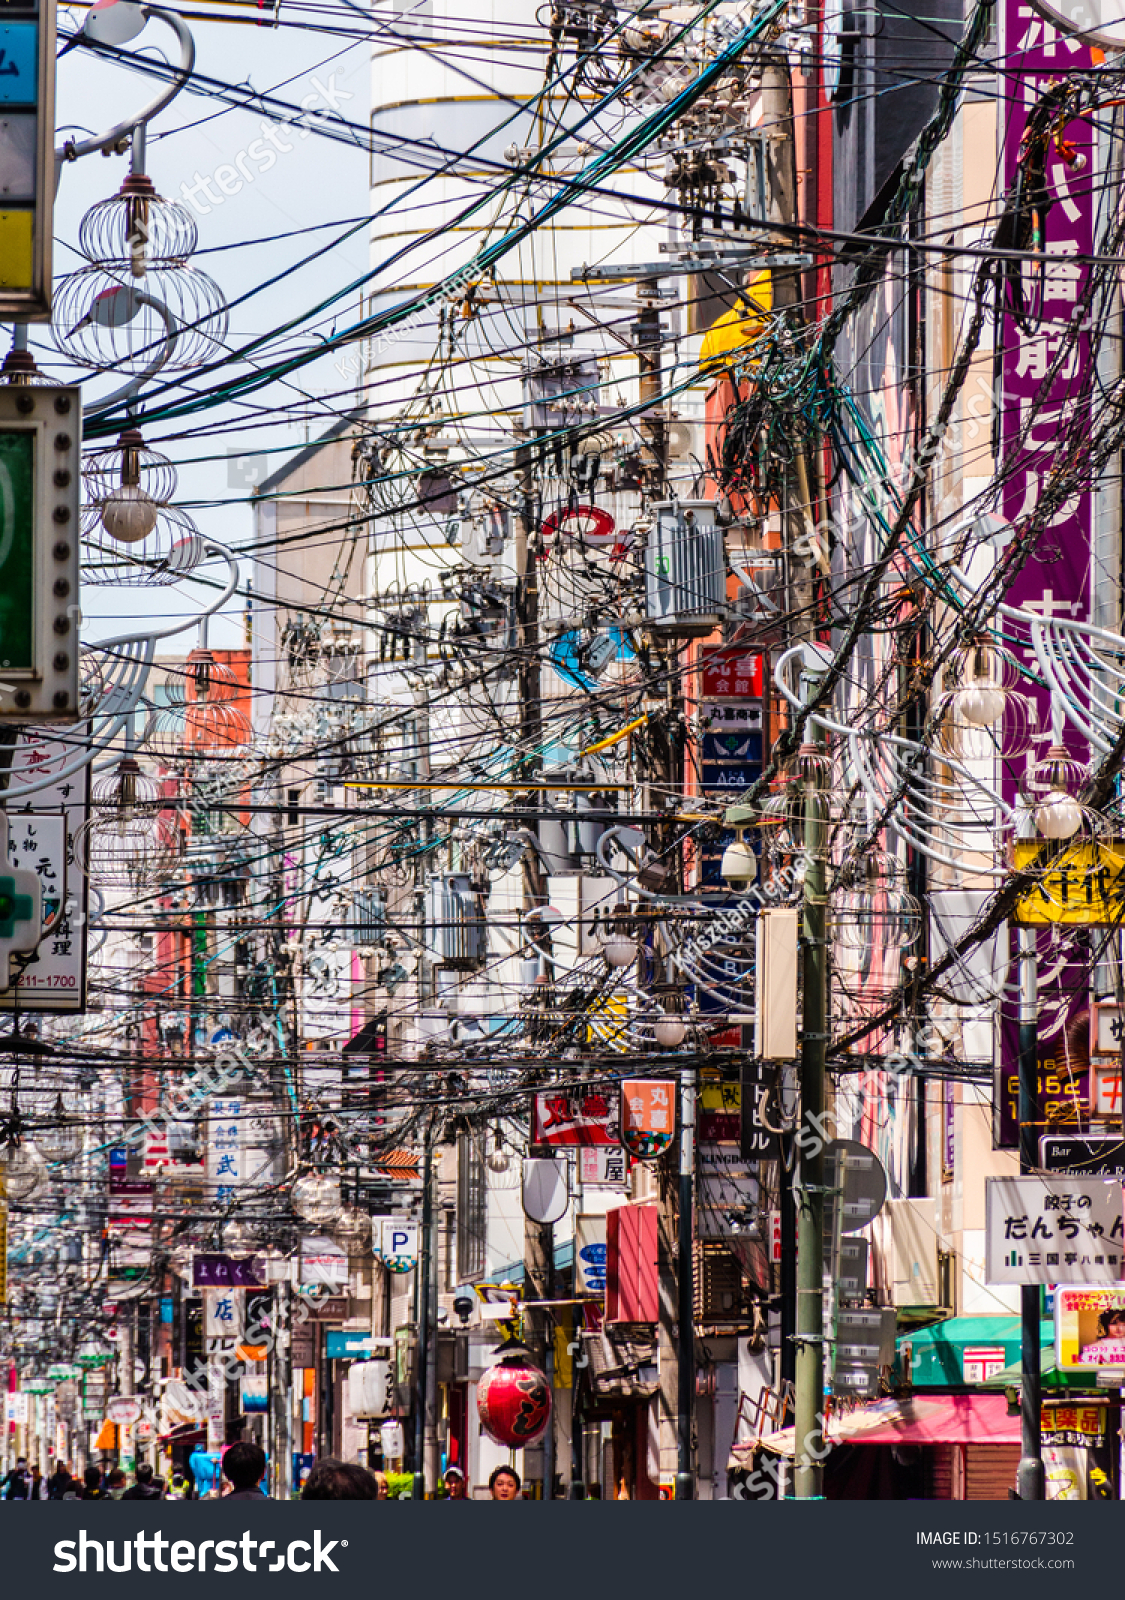 https://image.shutterstock.com/shutterstock/photos/1516767302/display_1500/stock-photo-osaka-japan-april-th-huge-amount-of-cables-and-wires-in-the-sky-somewhere-in-dotonbori-1516767302.jpg